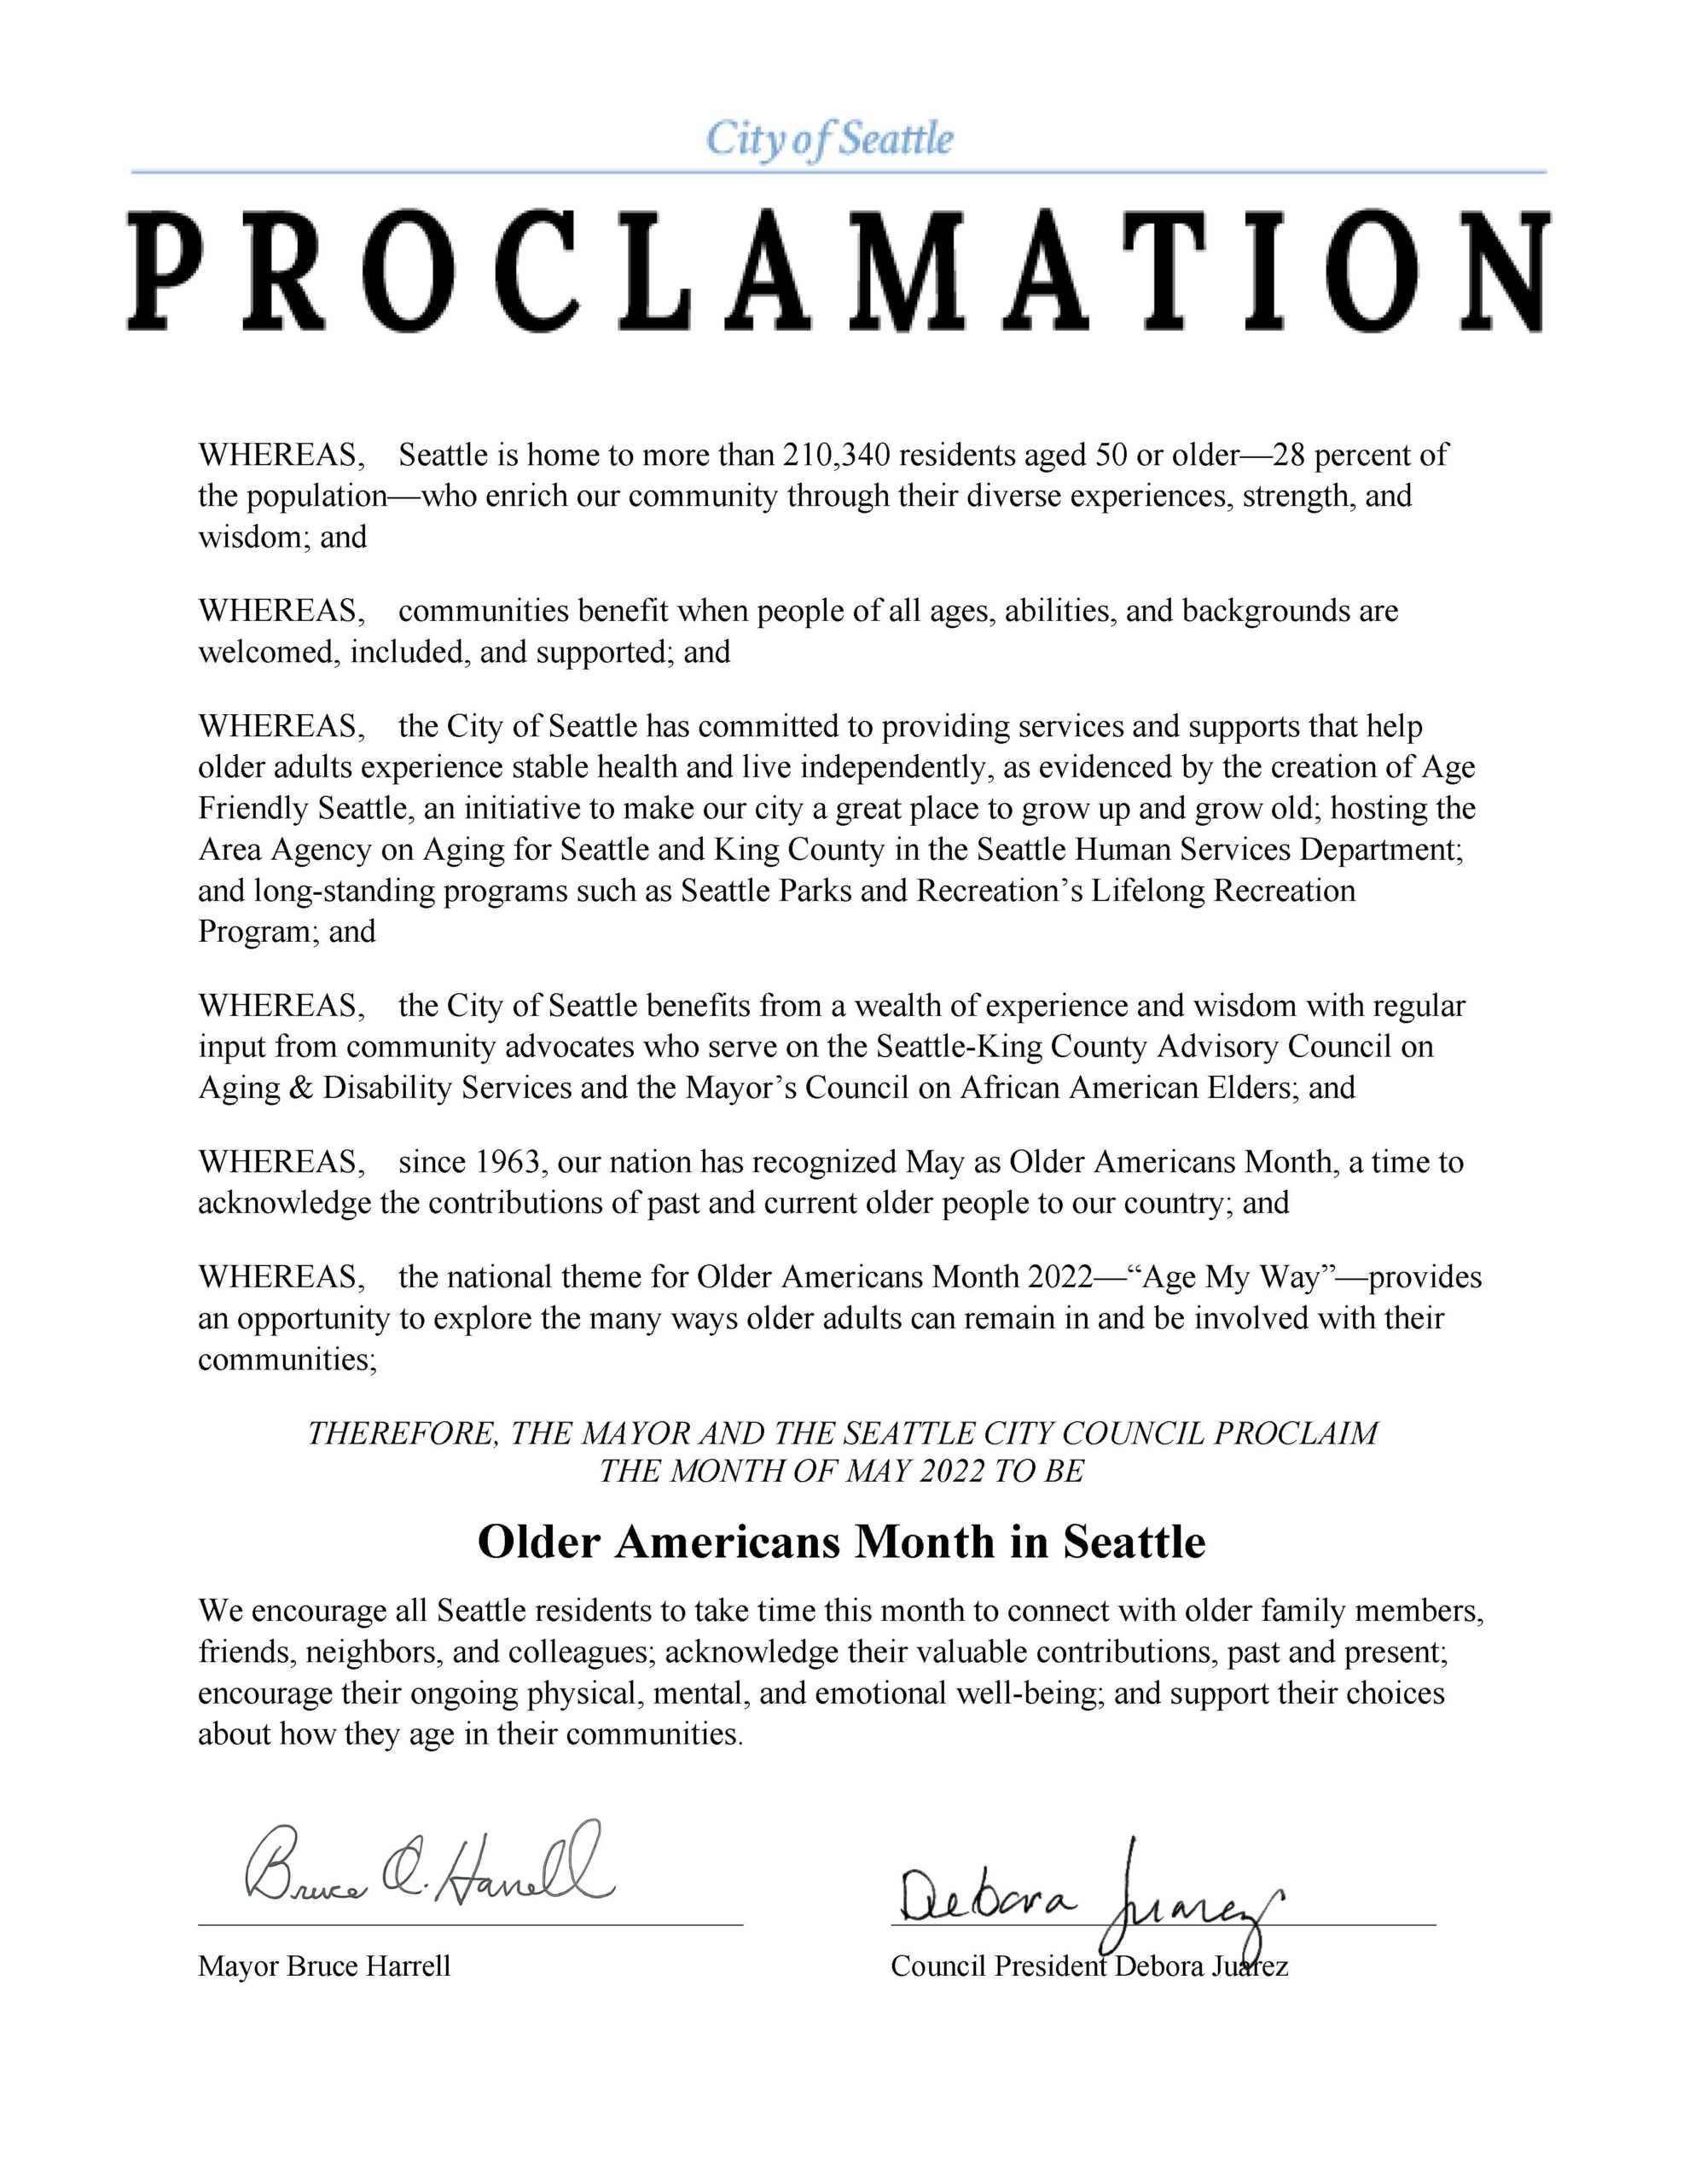 2022 Older Americans Month proclamation from Mayor Bruce Harrell and the Seattle City Council.